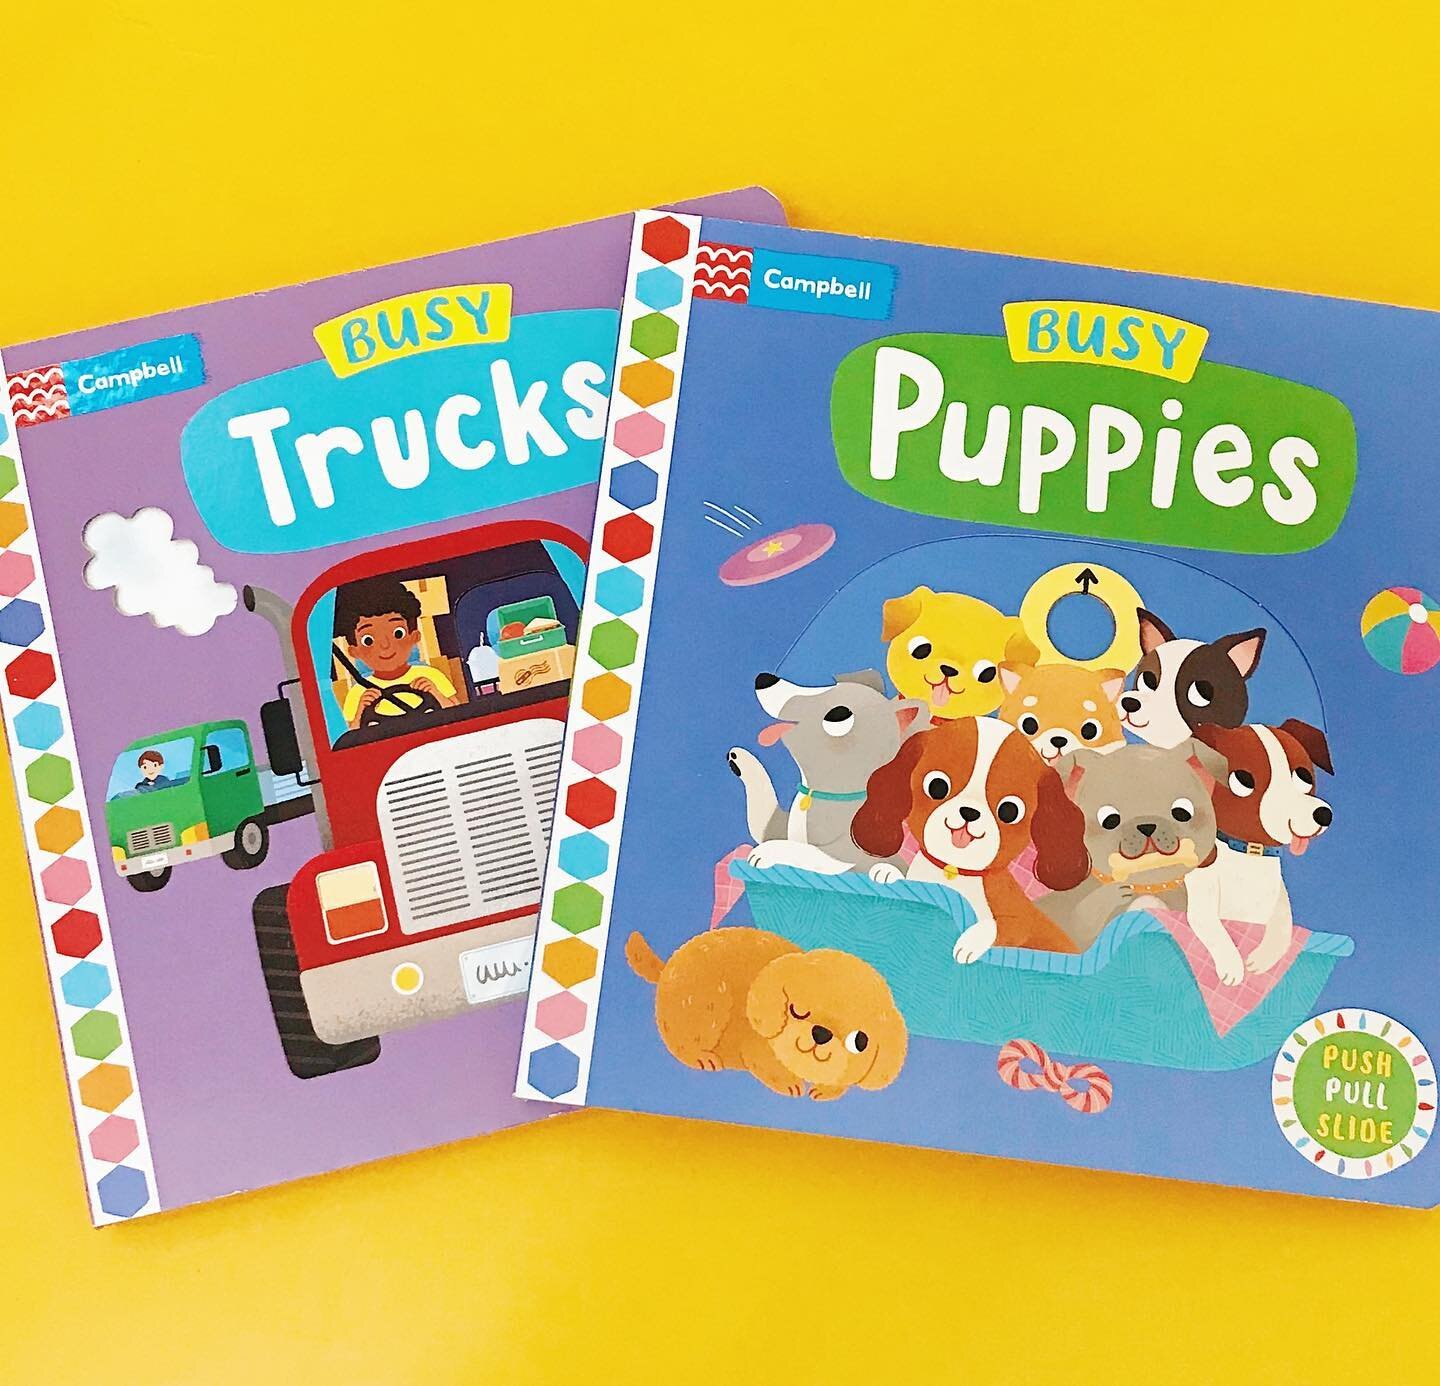 I&rsquo;m so proud and excited to share my new books &lsquo;Busy Trucks&rsquo; and &lsquo;Busy Puppies&rsquo;! 🚚🐶

Many thanks to the brilliant team at @campbell_books 

I LOVE how these titles have turned out!🥰

#mybook #illustration #childrensil